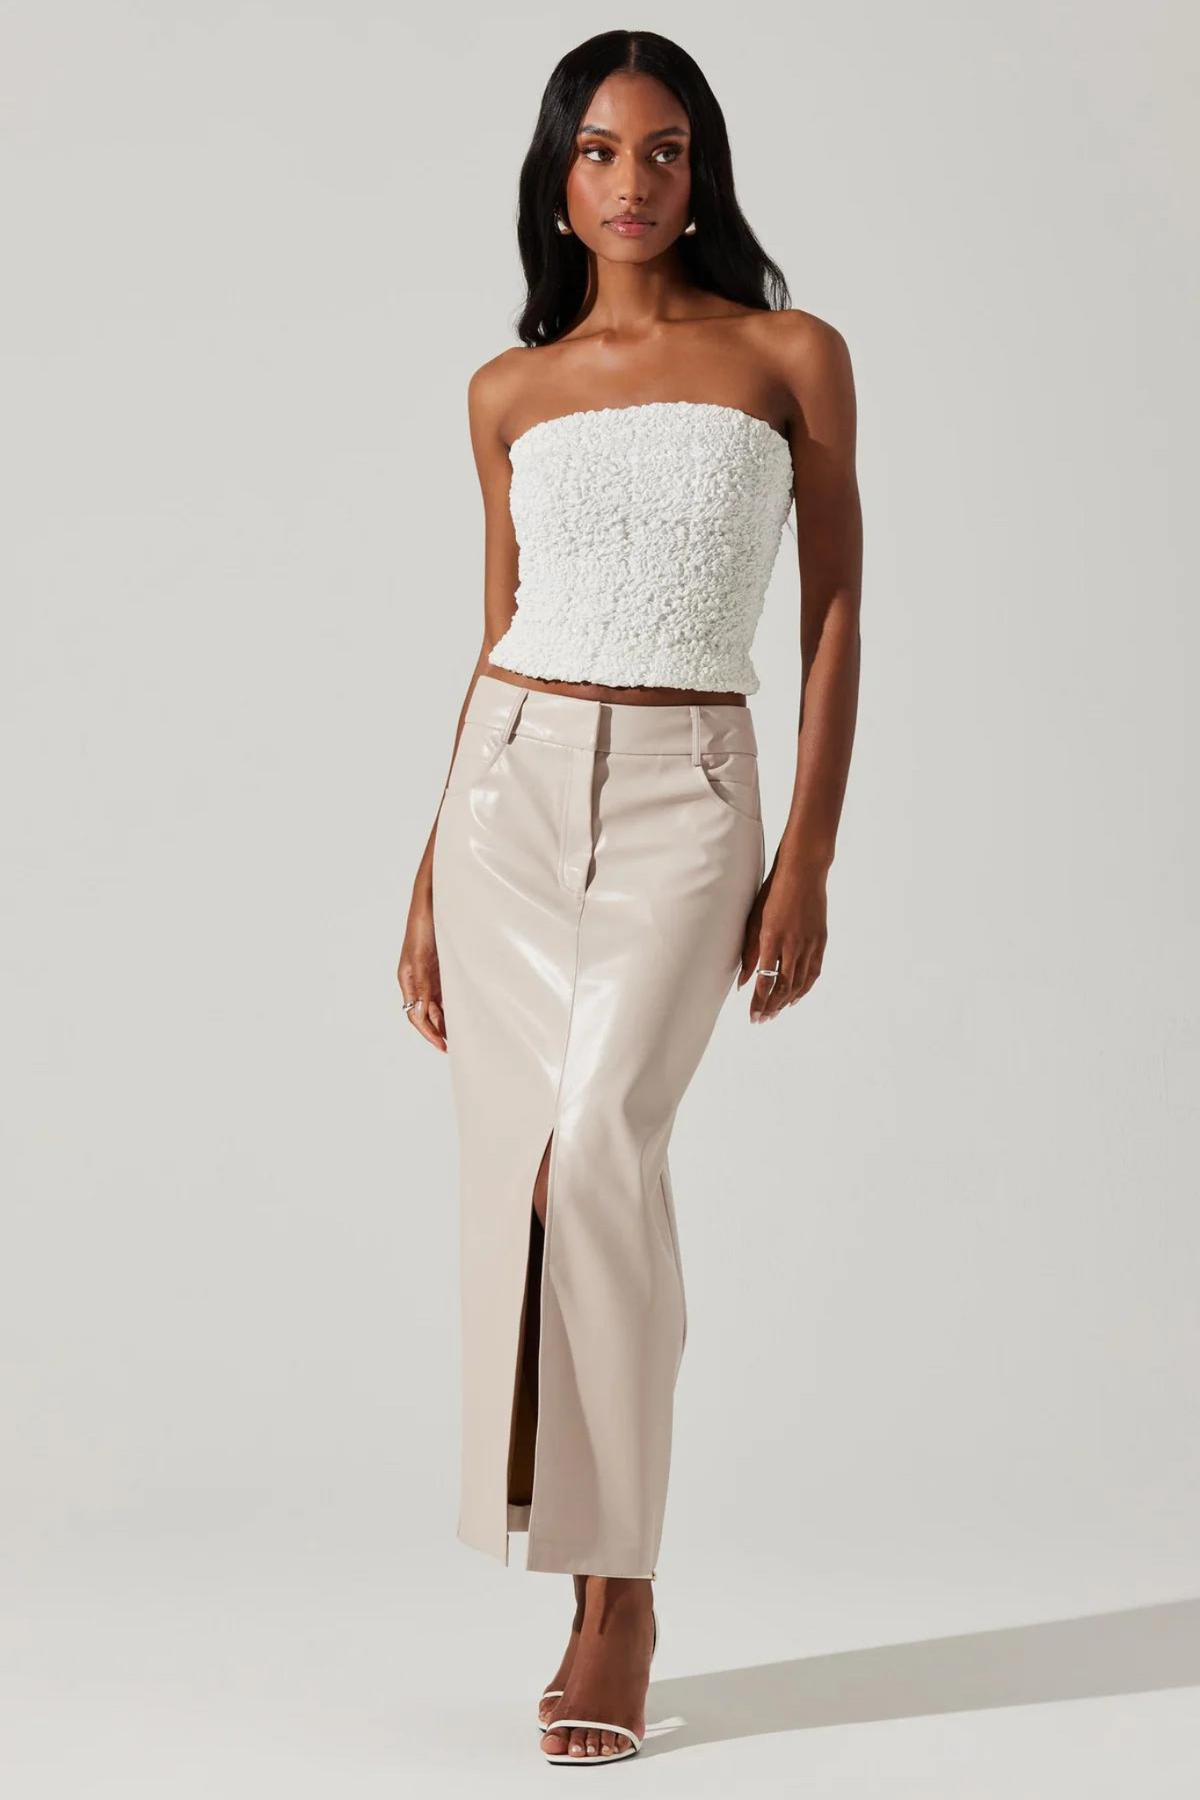 ASTR The Label | White Cinna Textured Tube Top | Sweetest Stitch